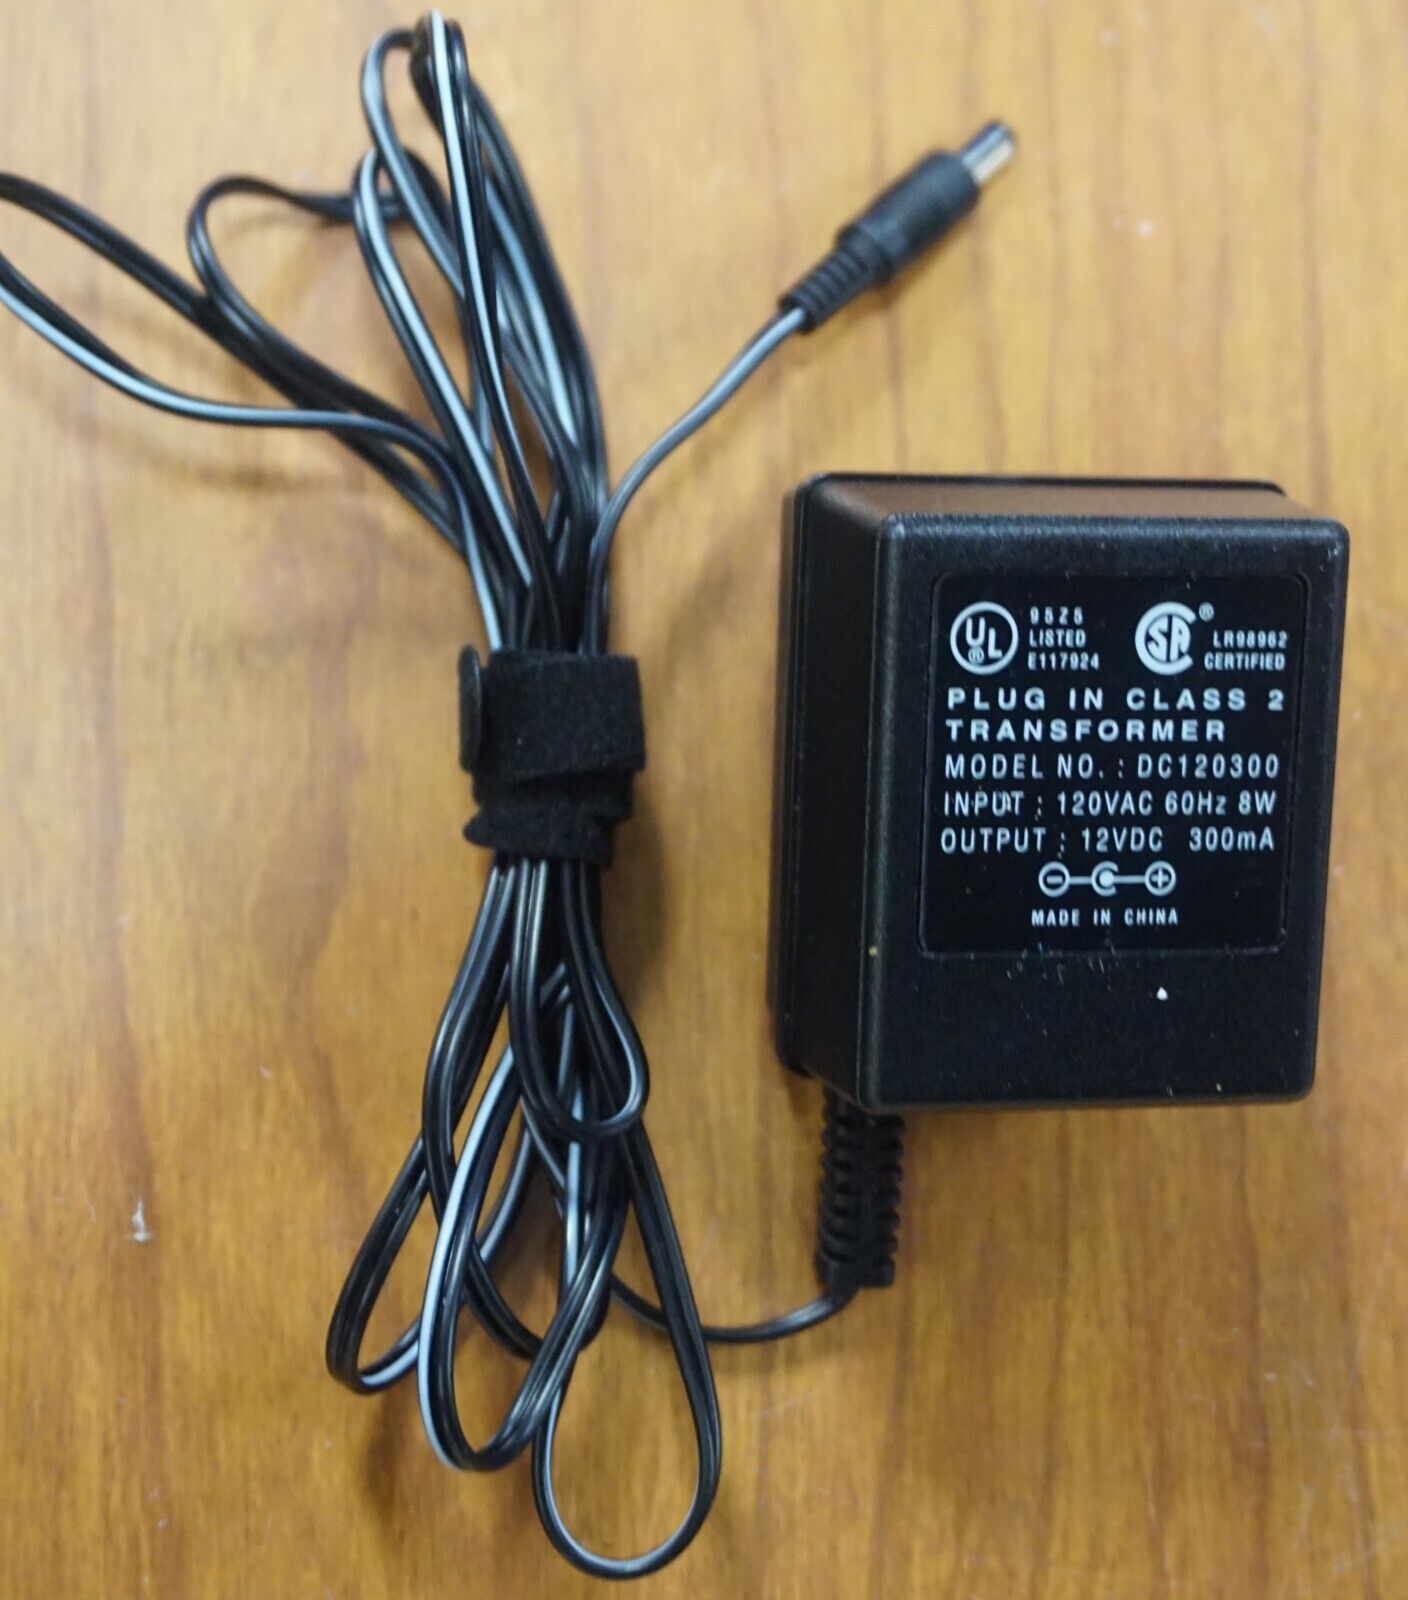 *Brand NEW*UL Adapter For Gemini DC120300 12VDC 300mA Class 2 TransFormer Power Supply Cord Cable